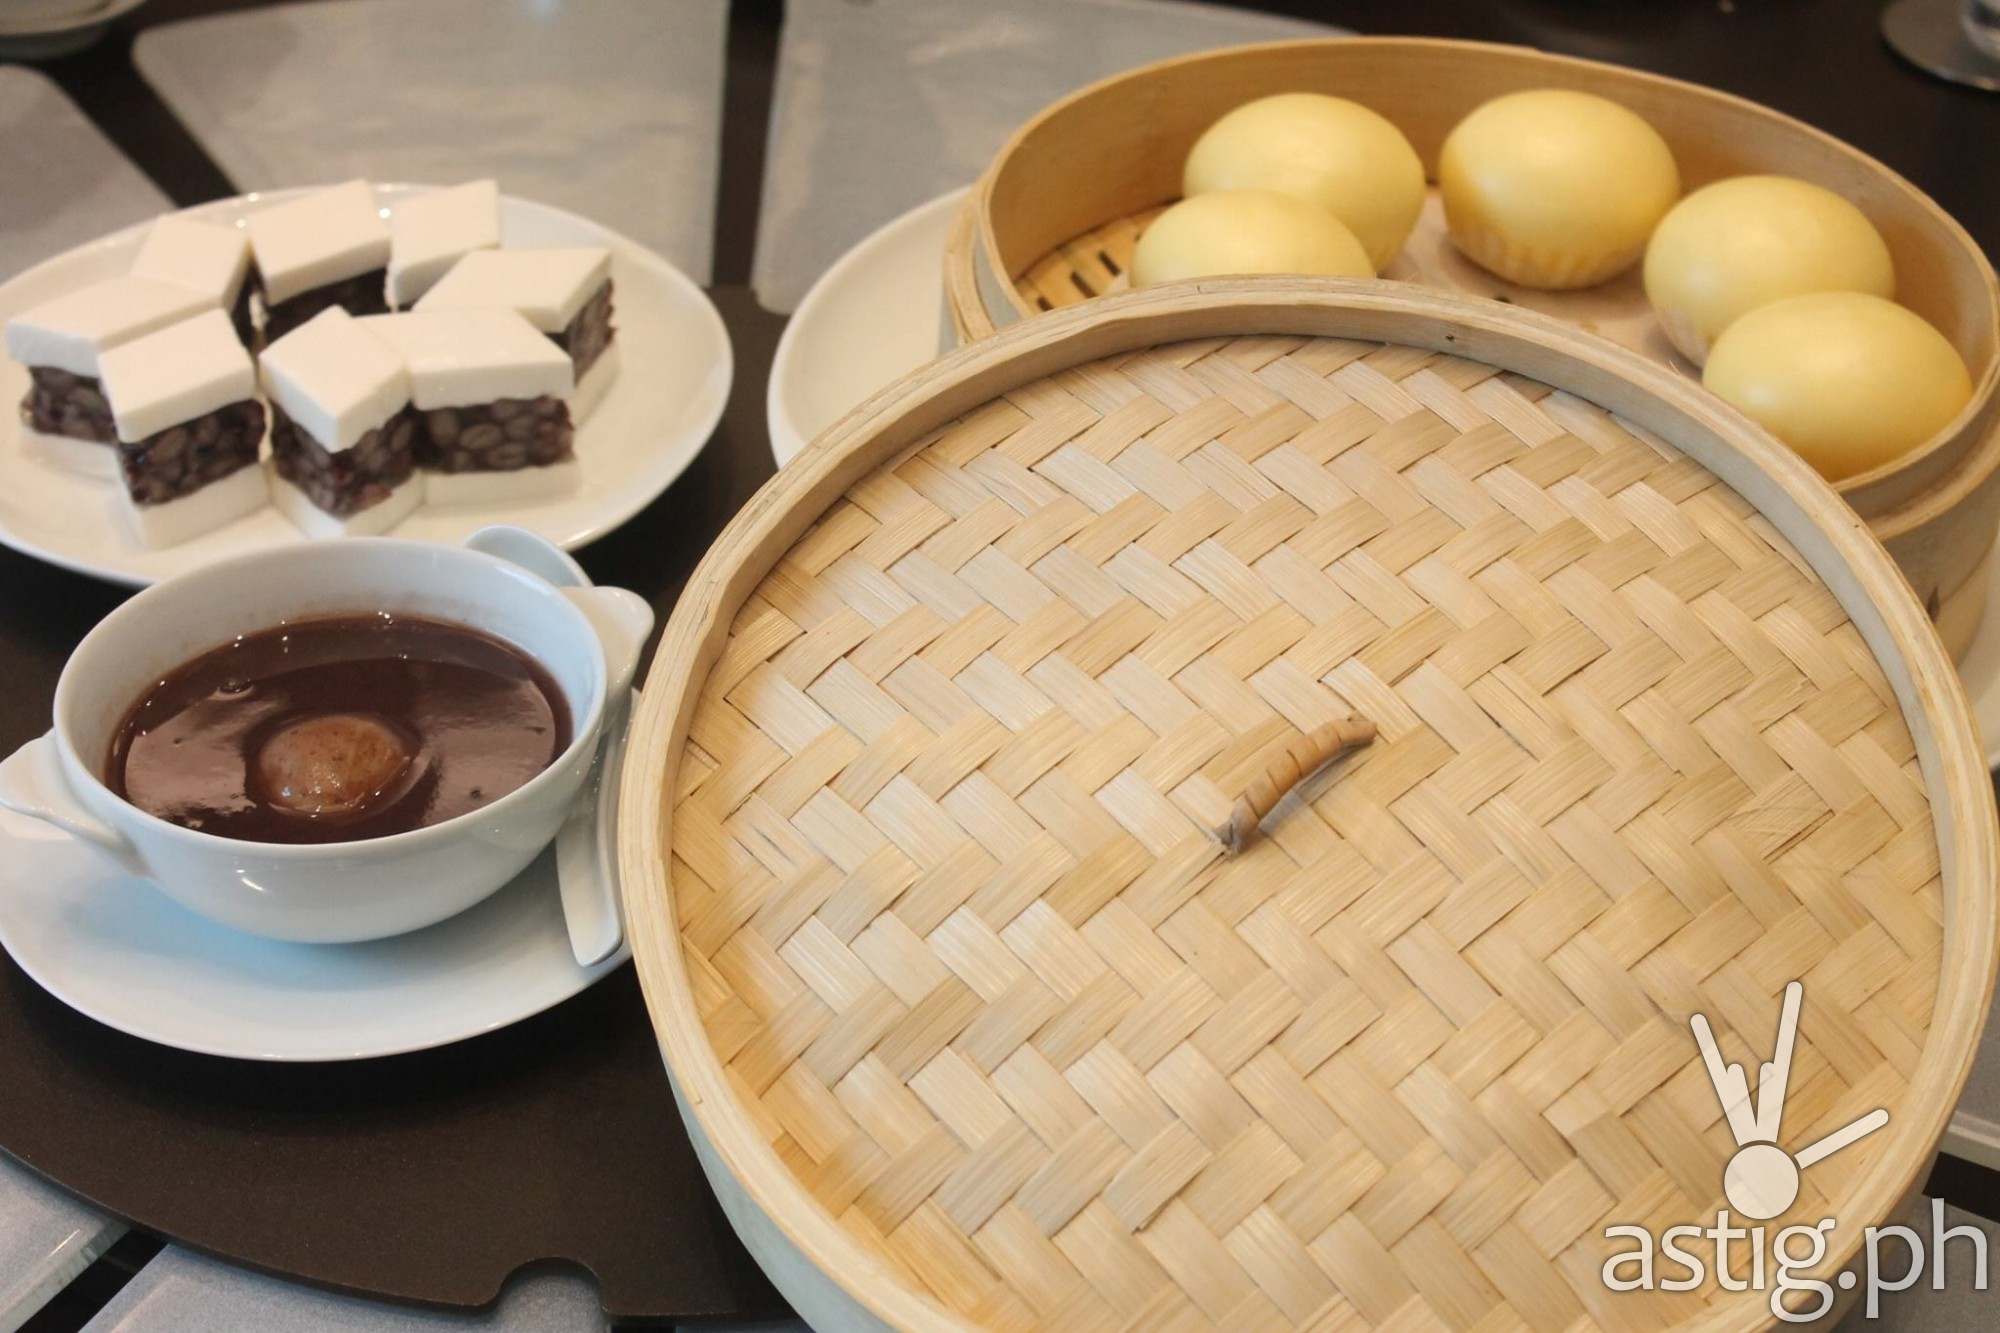 Desserts (L-R) Coconut pudding, Sweeted Red Bean with dumpling, and Custard Bun with Egg Yolk - Man Ho Chinese restaurant